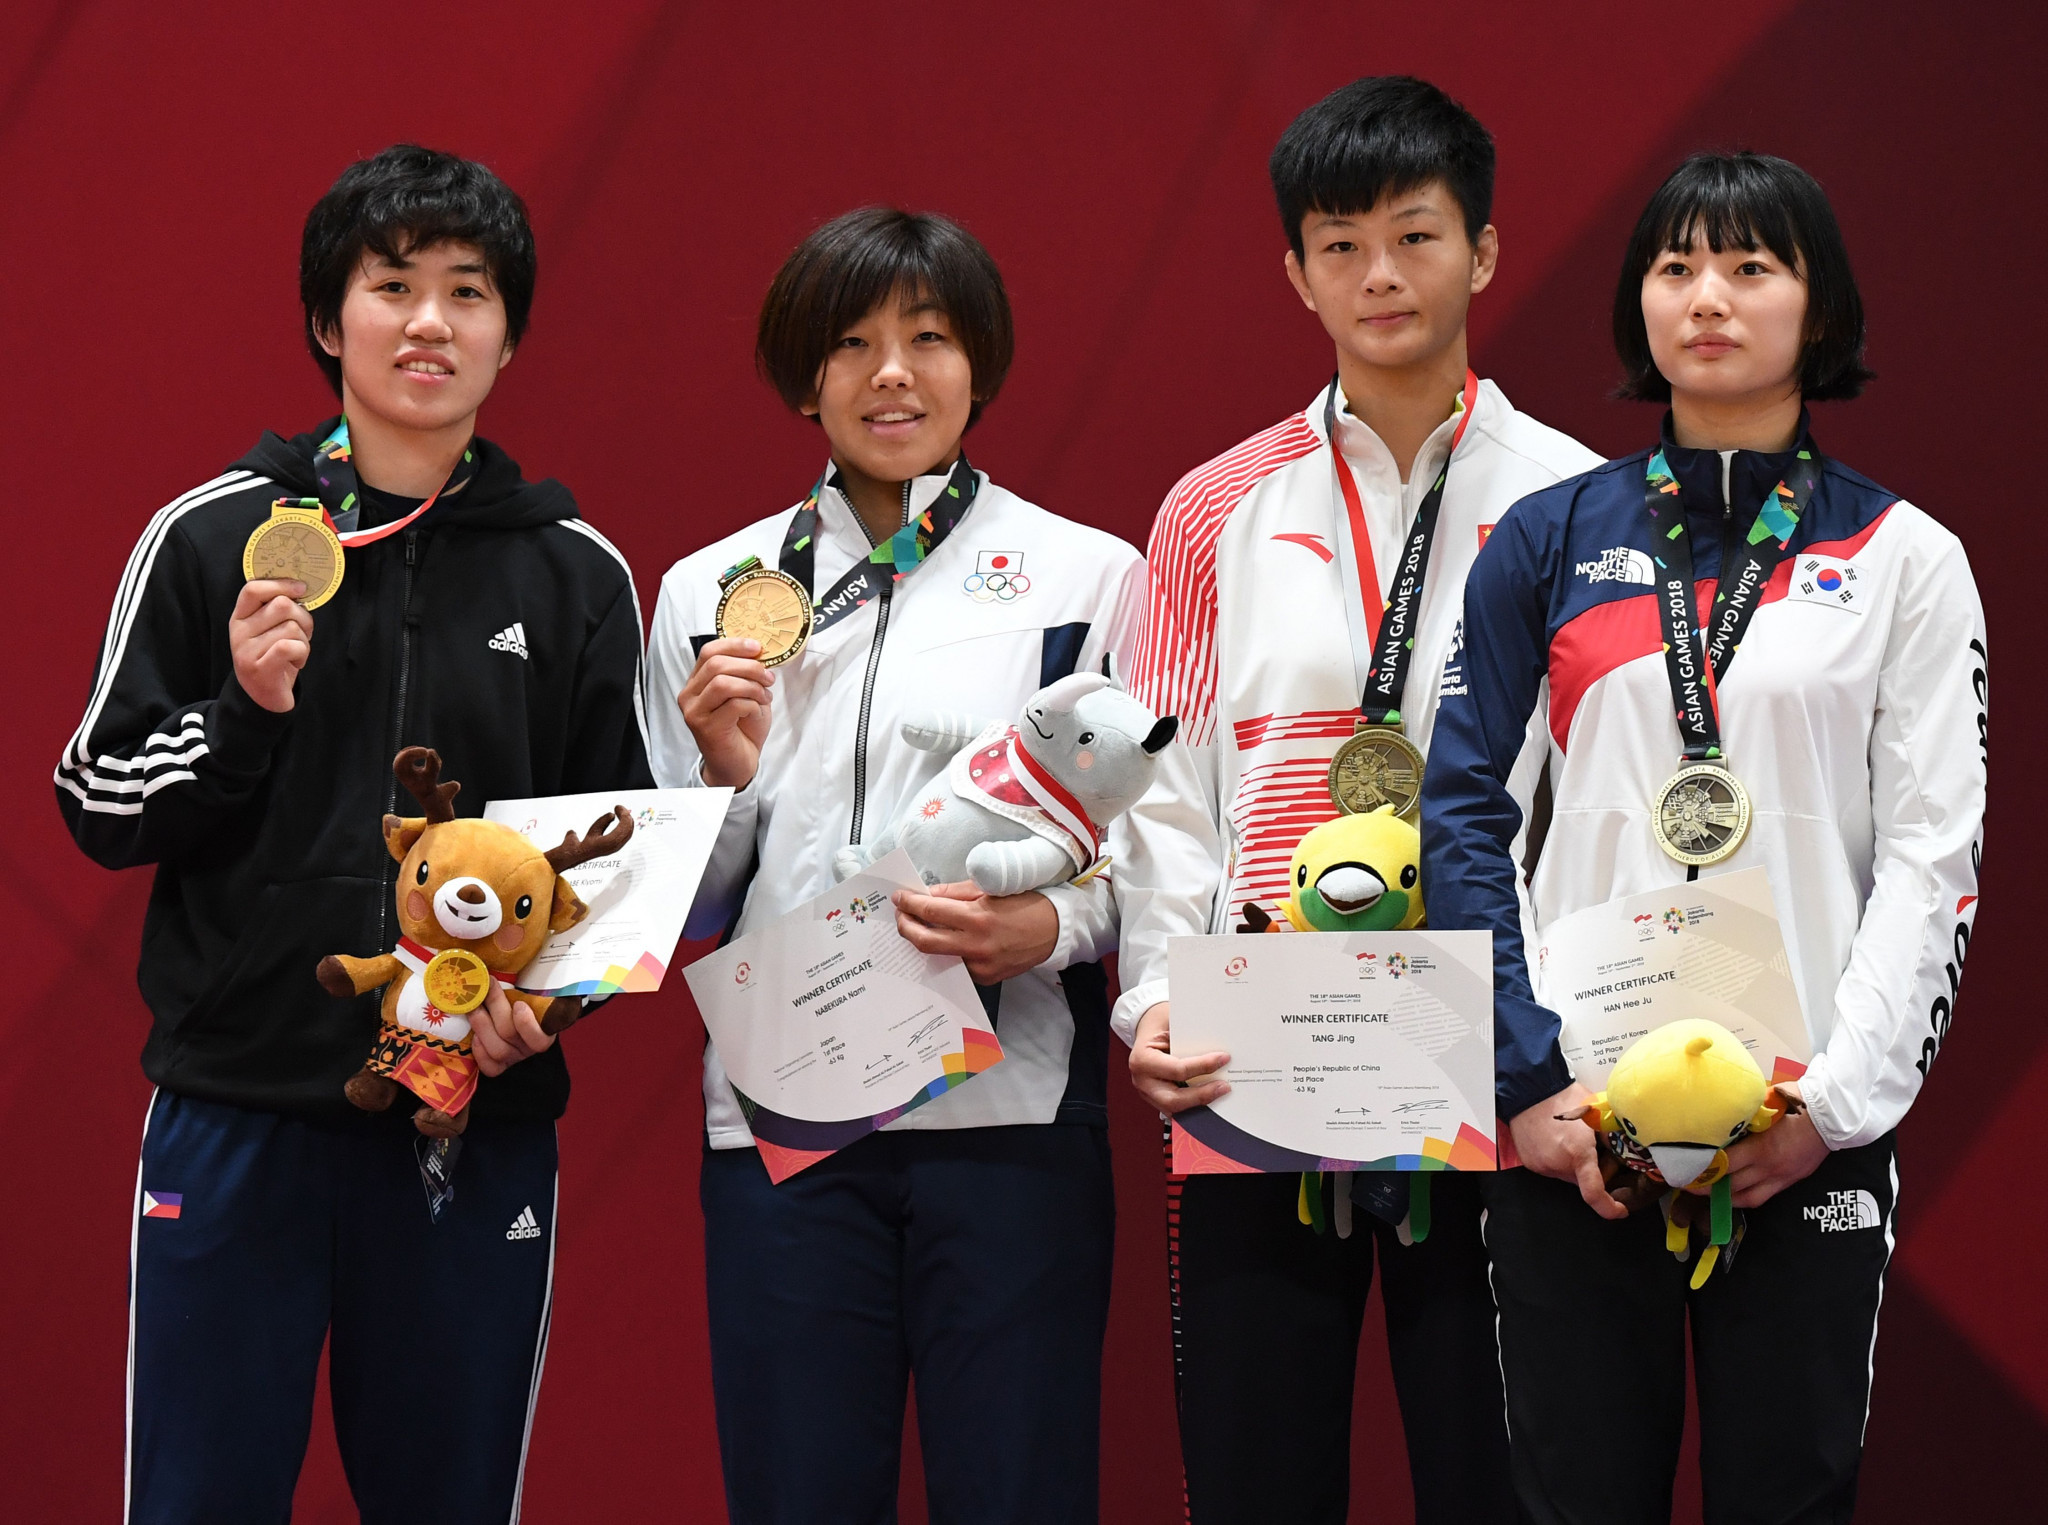 Nami Nabekura, second from left, was one of four judo gold medallists for Japan at the 2018 Asian Games today ©Getty Images